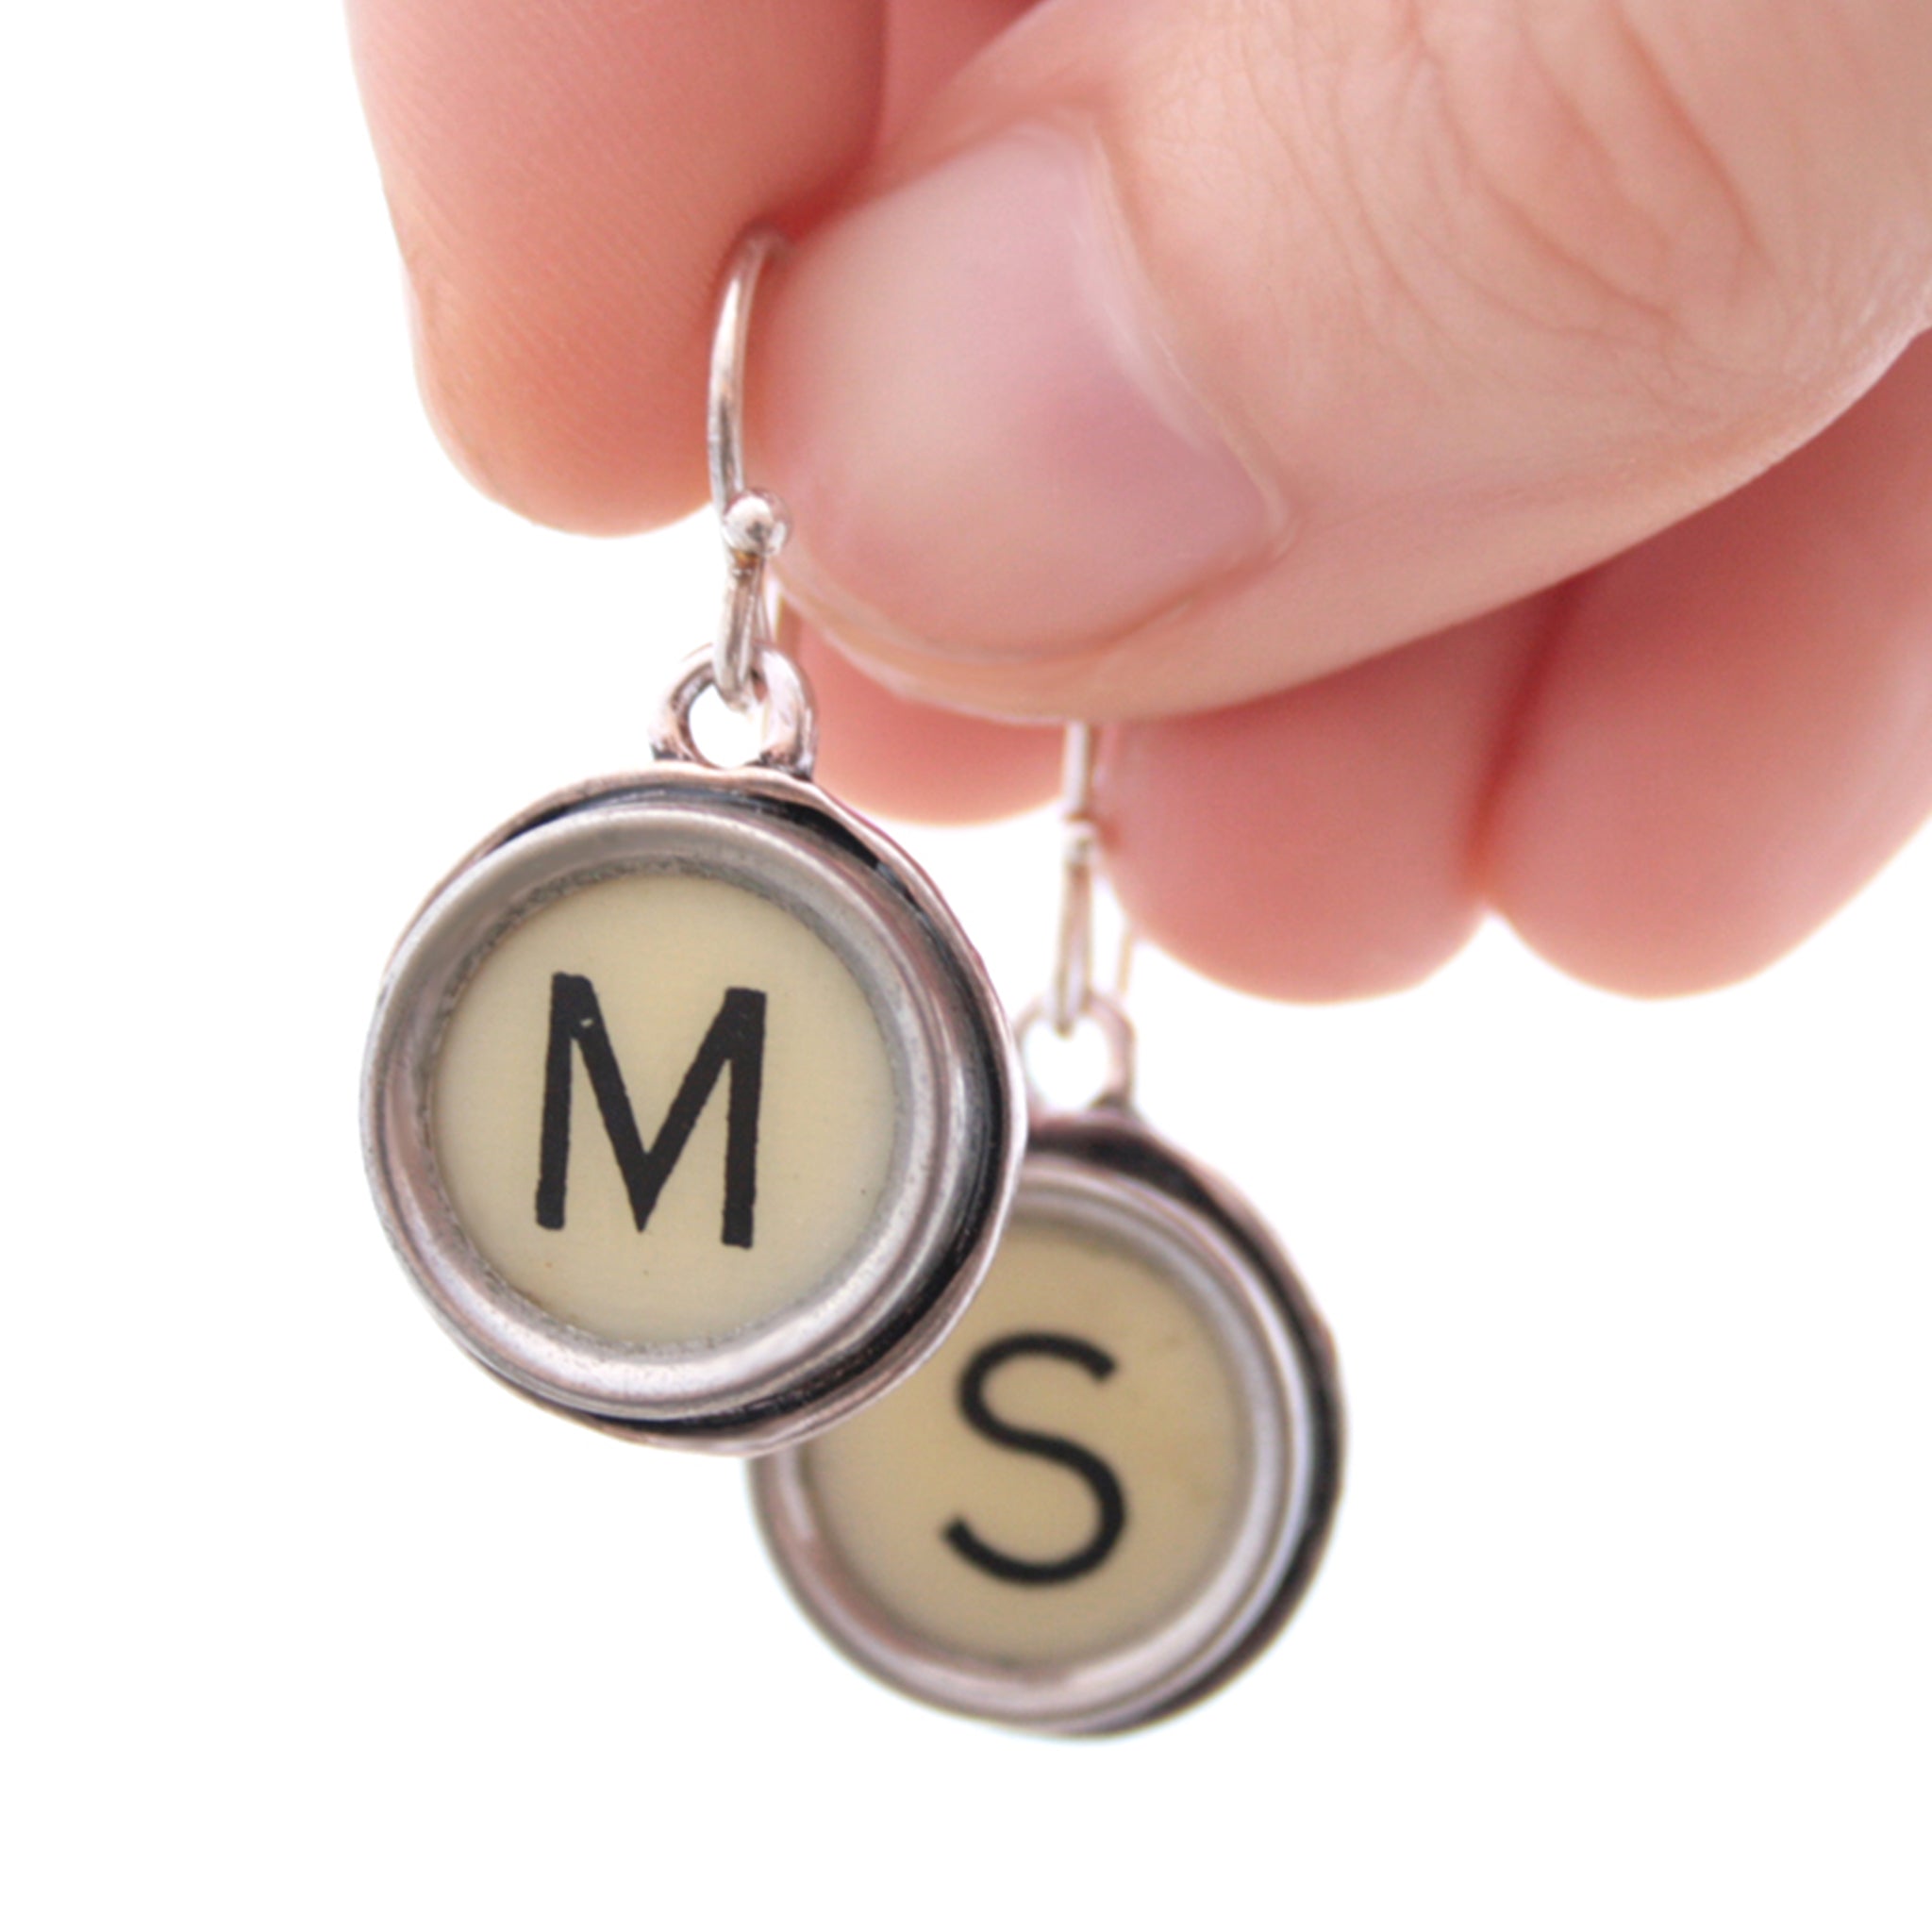 M and S Ivory Typewriter keys turned into initial earrings hold in hand